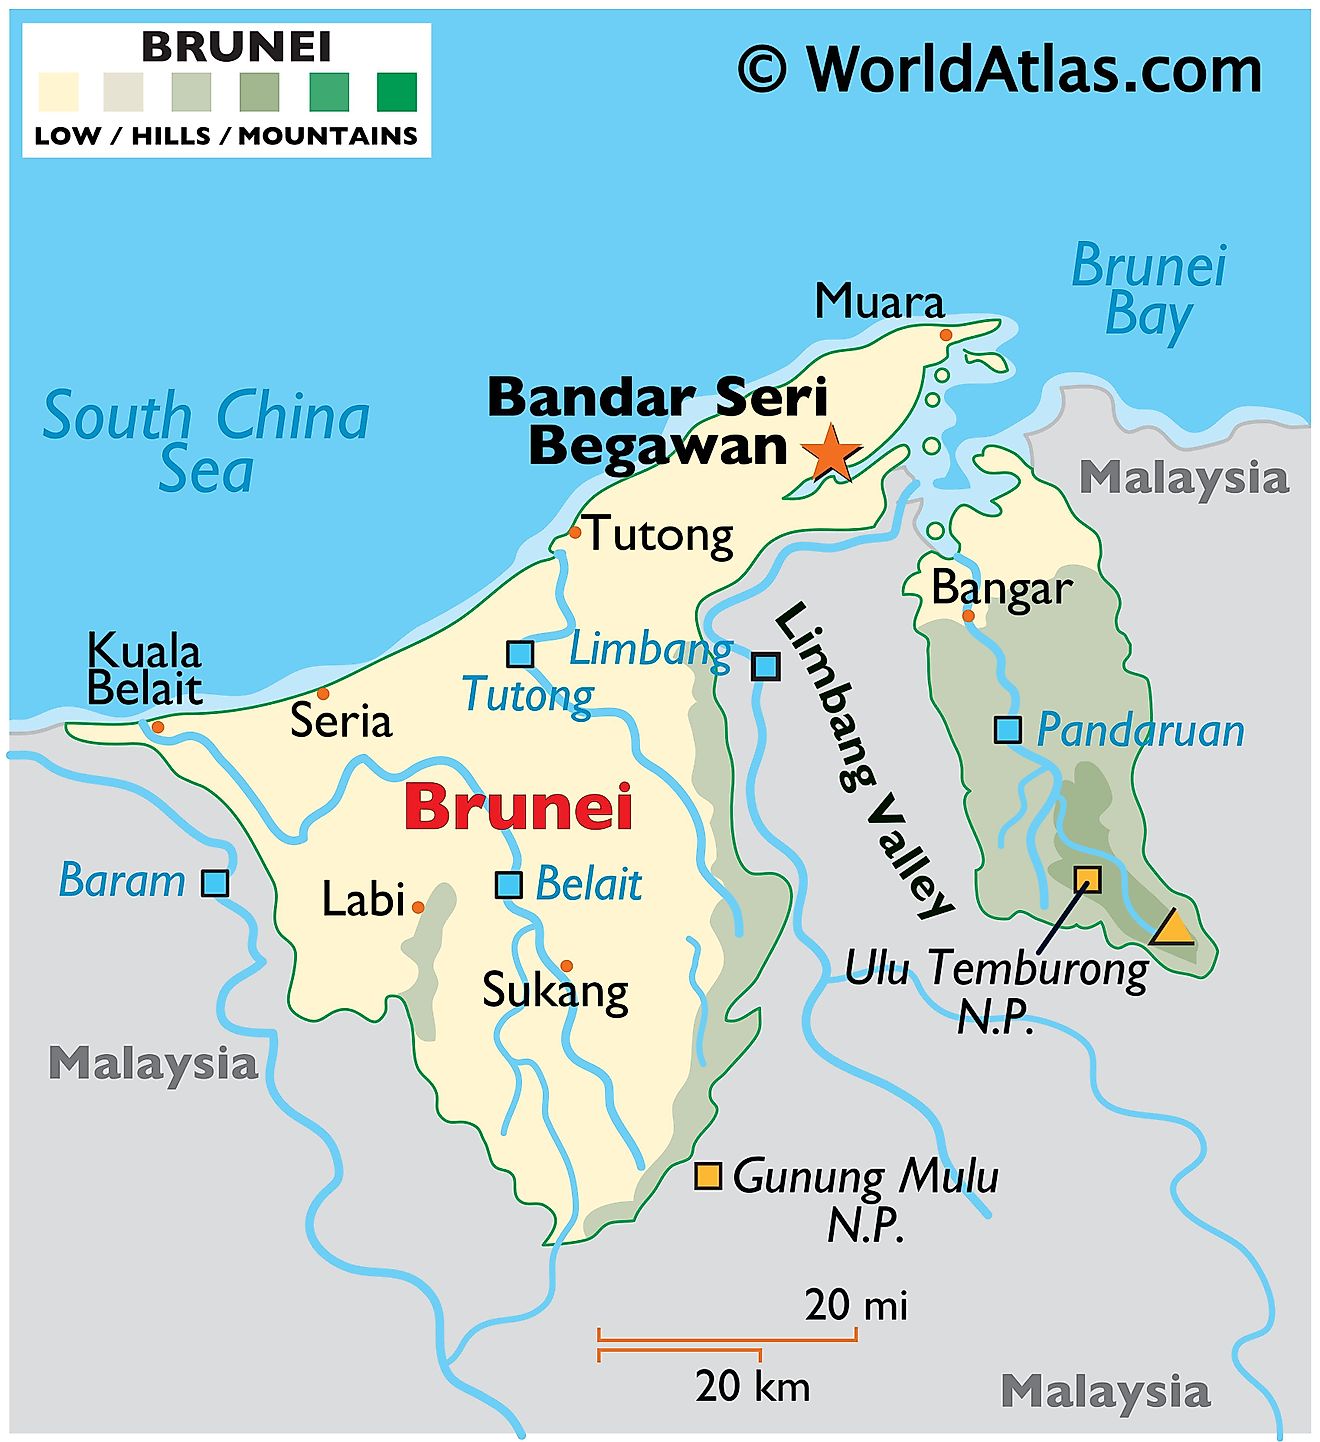 Physical Map of Brunei showing relief, major rivers, national park, South China Sea, bordering countries, major cities and towns, etc.